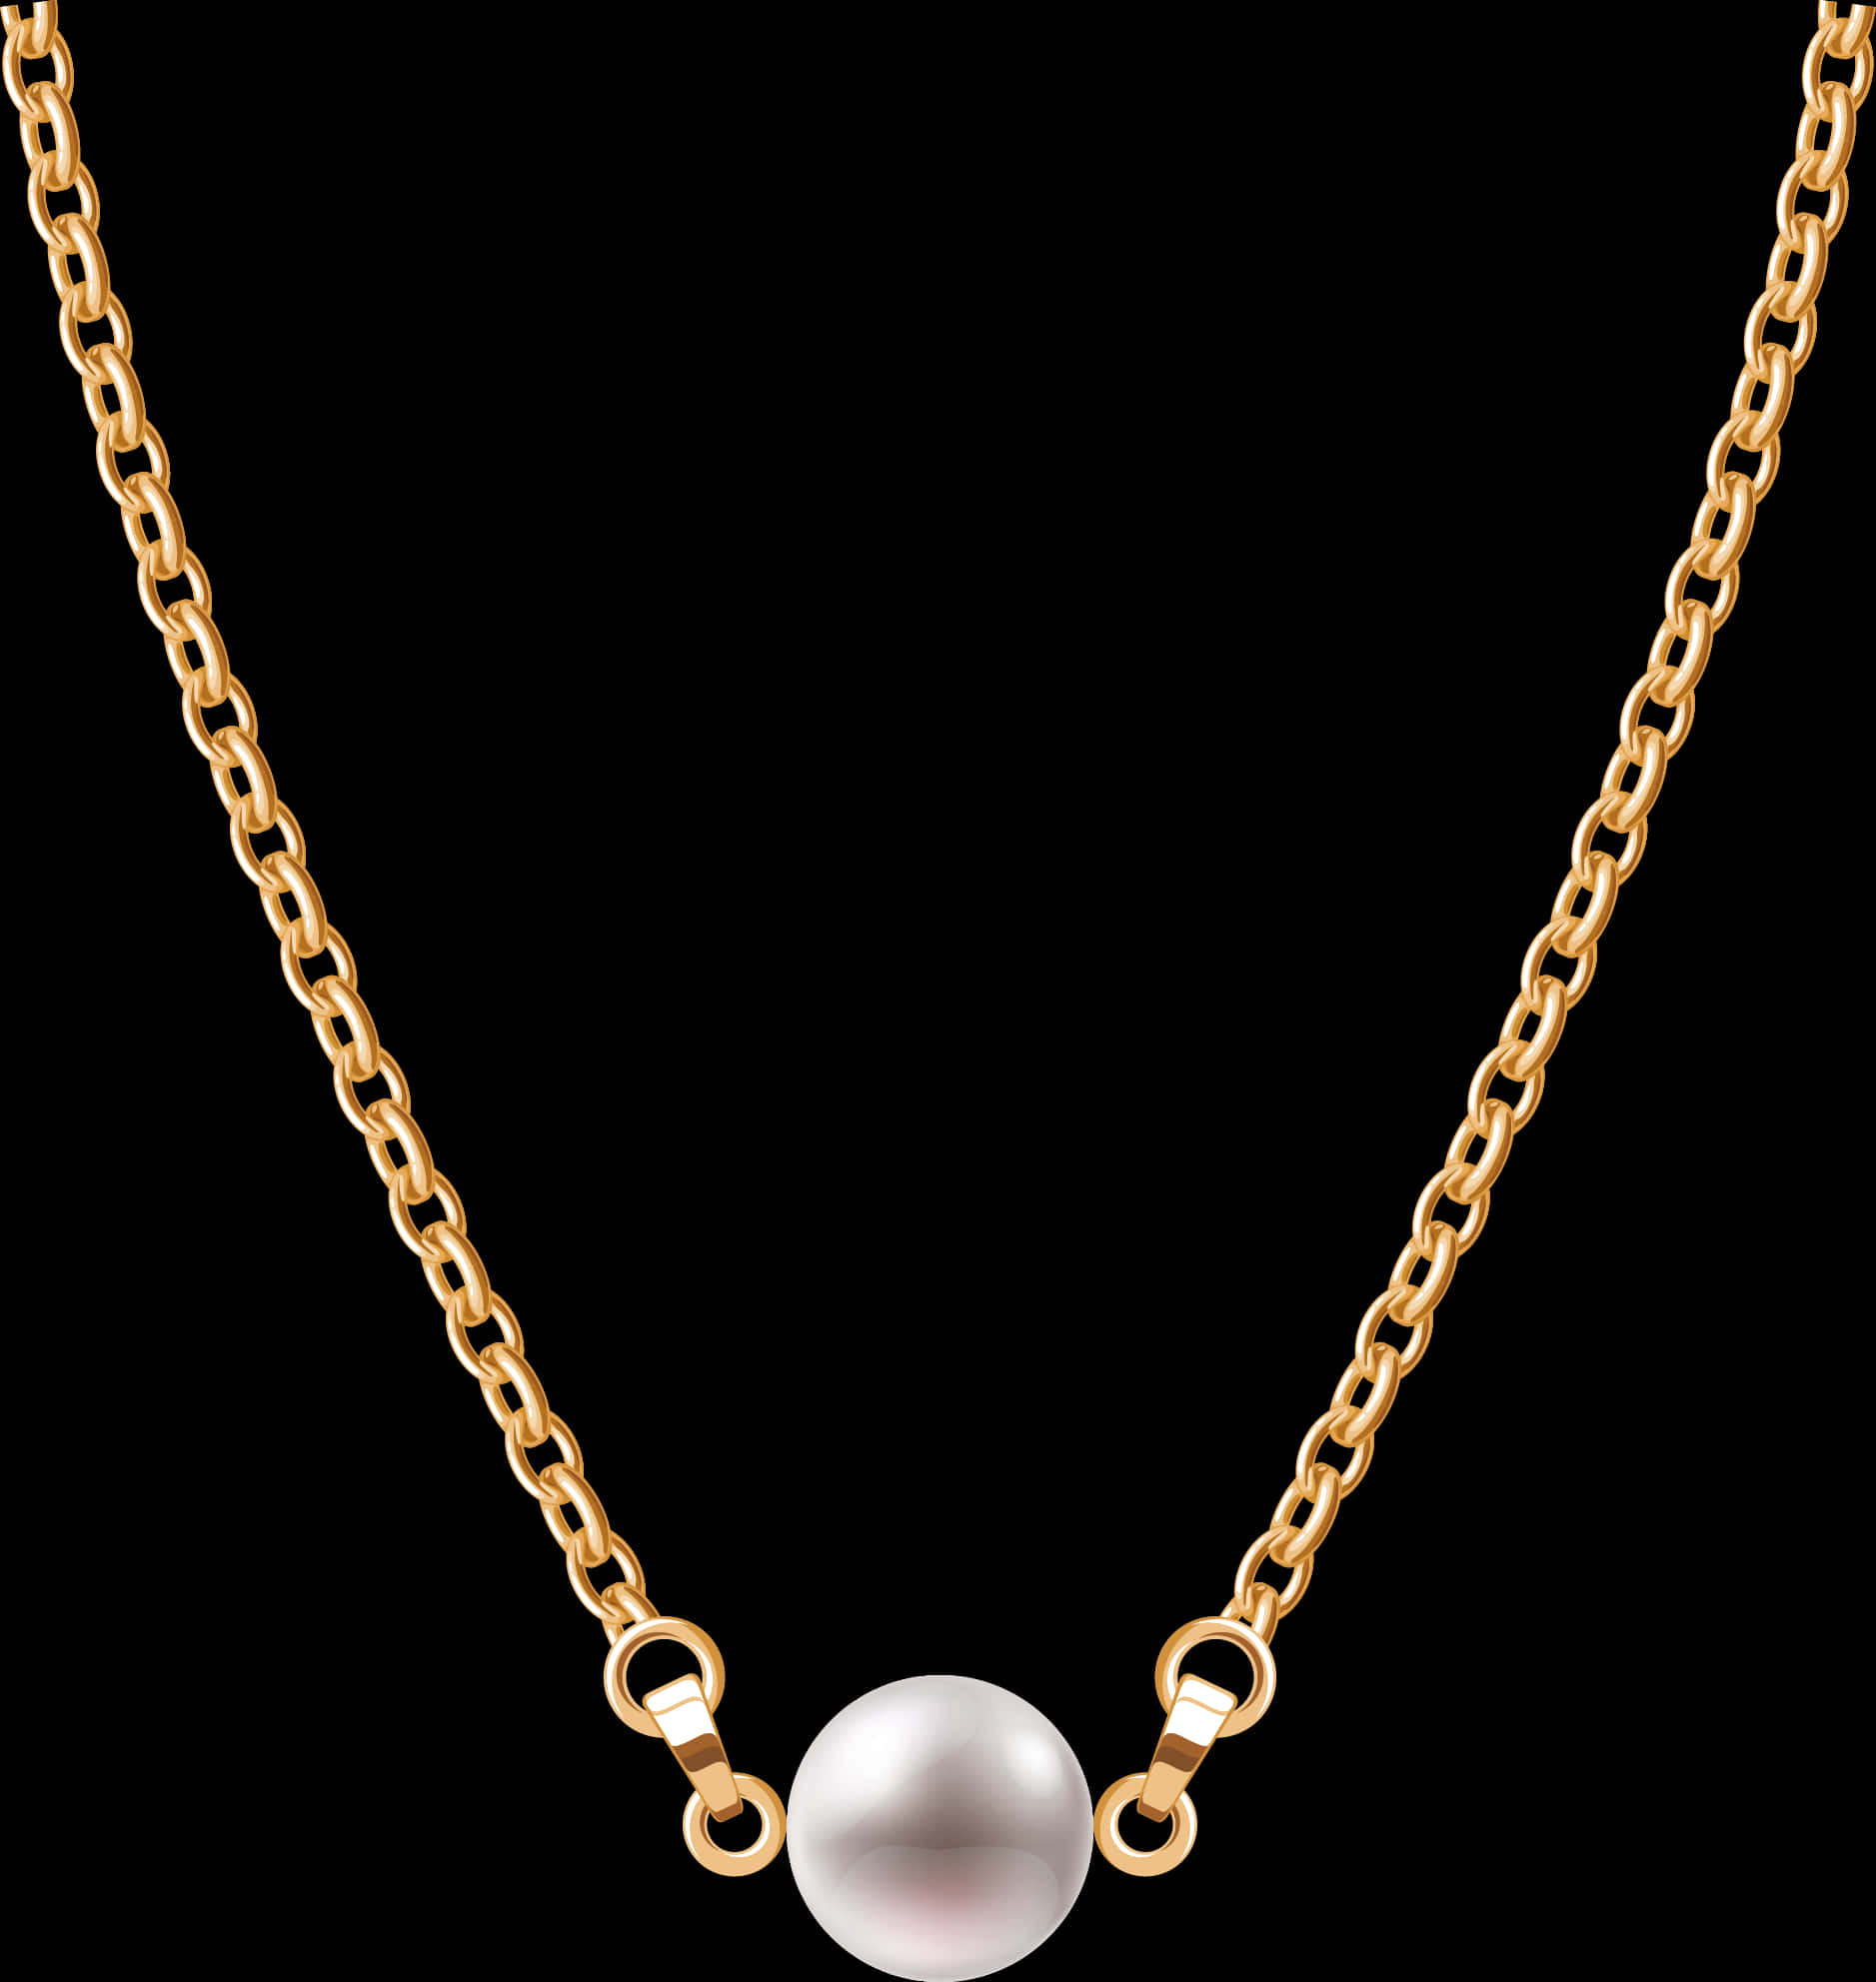 Elegant Gold Chainwith Pearl Pendant PNG image